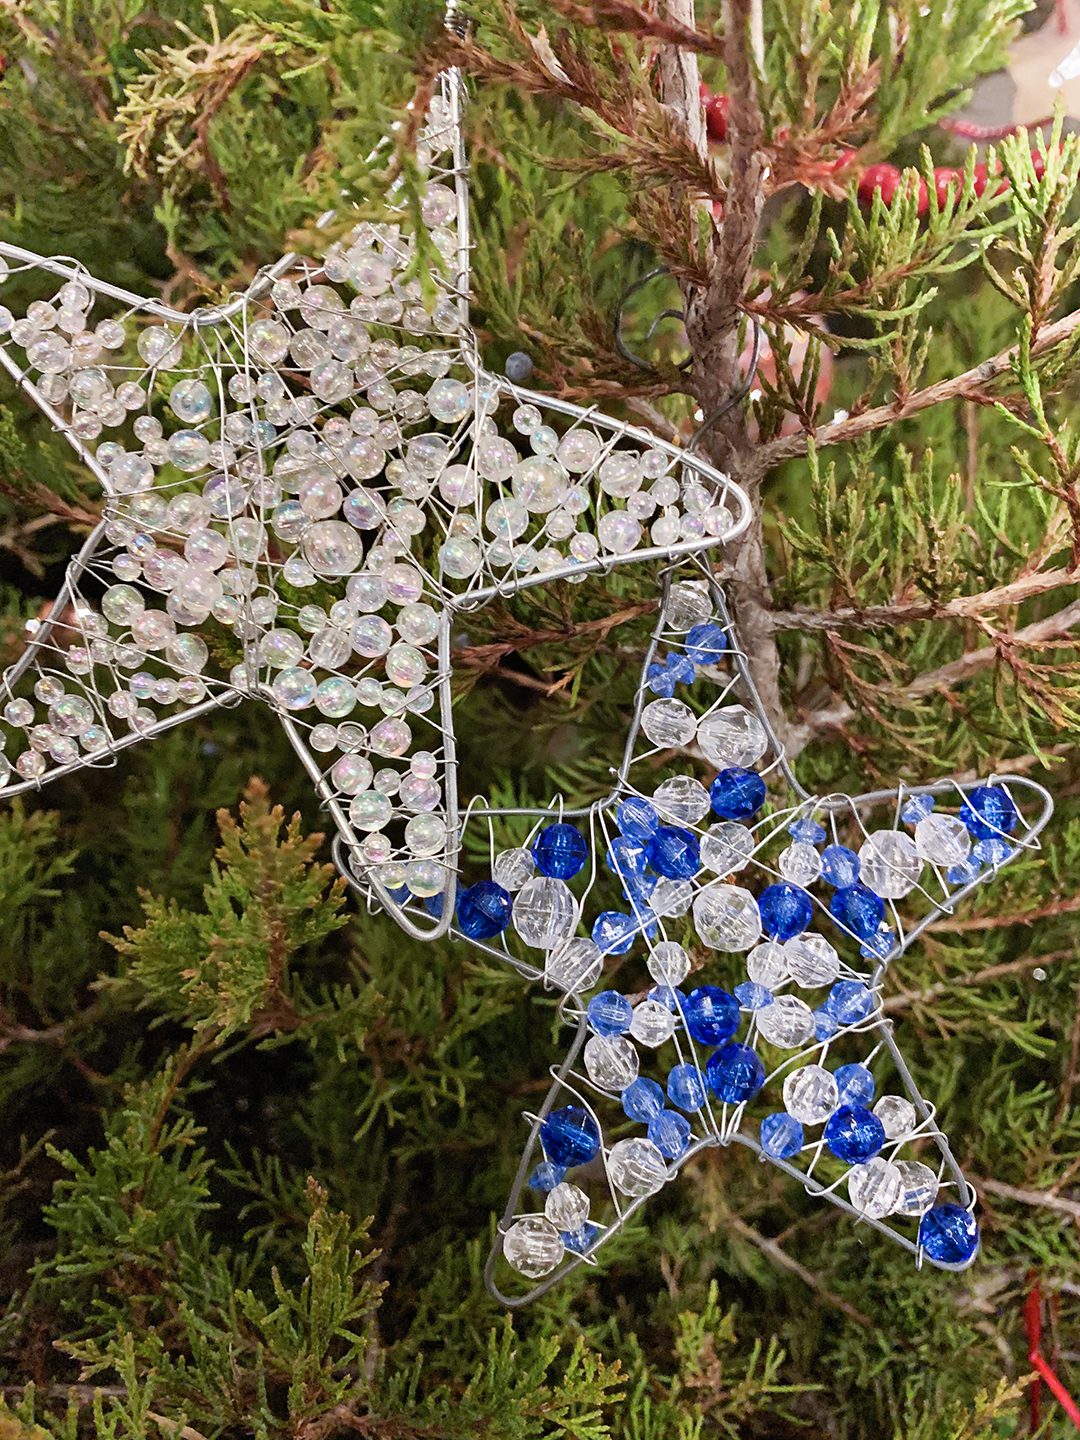 Sparkling Wire and Bead Ornament Stars hanging on a Christmas tree.